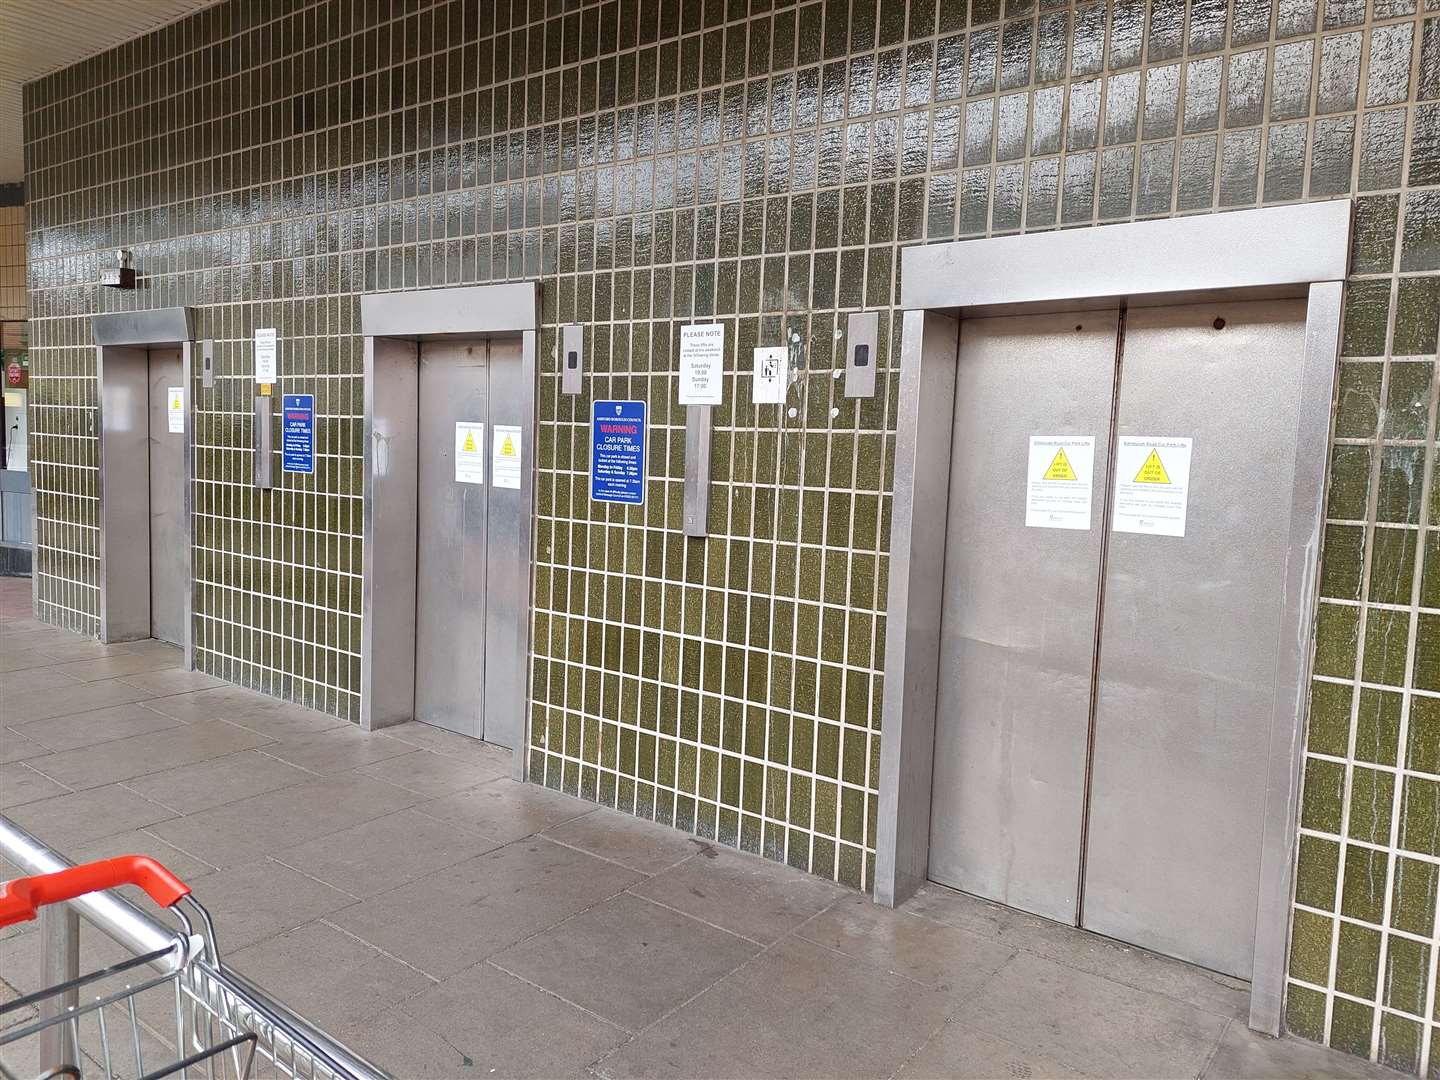 The lifts at Edinburgh Road car park closed following a safety inspection